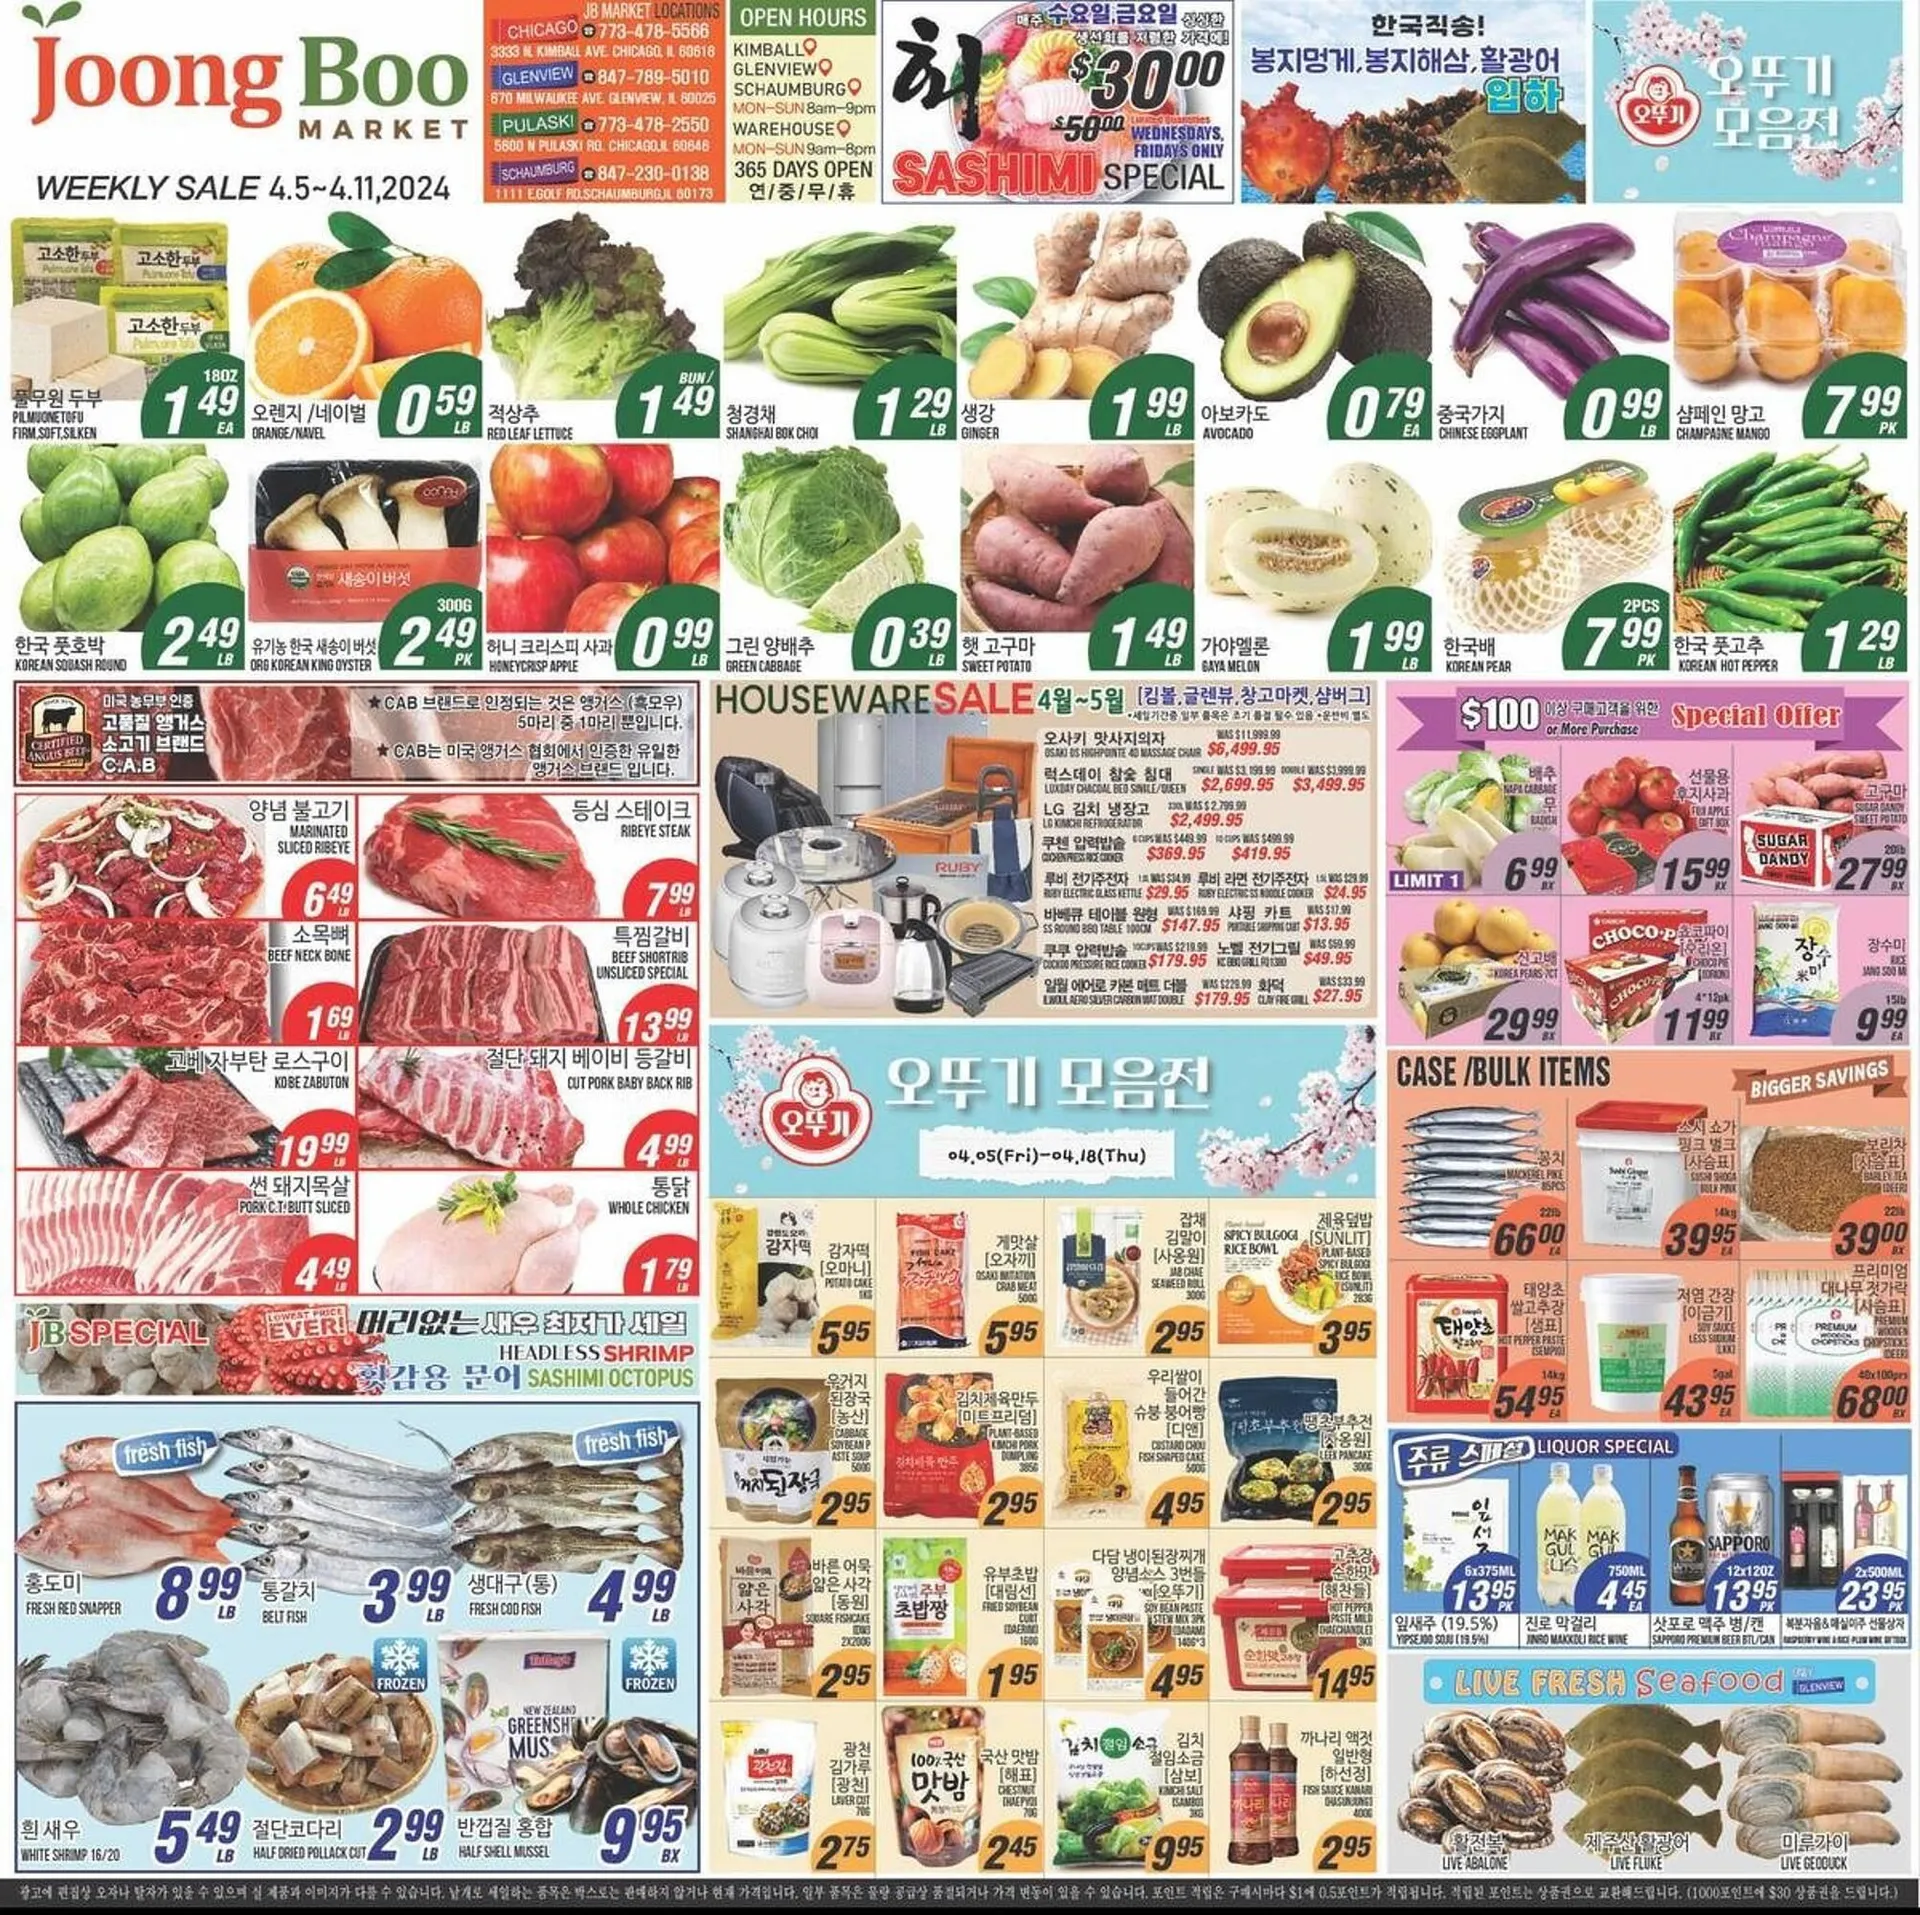 Weekly ad Joong Boo Market Weekly Ad from April 5 to April 11 2024 - Page 1